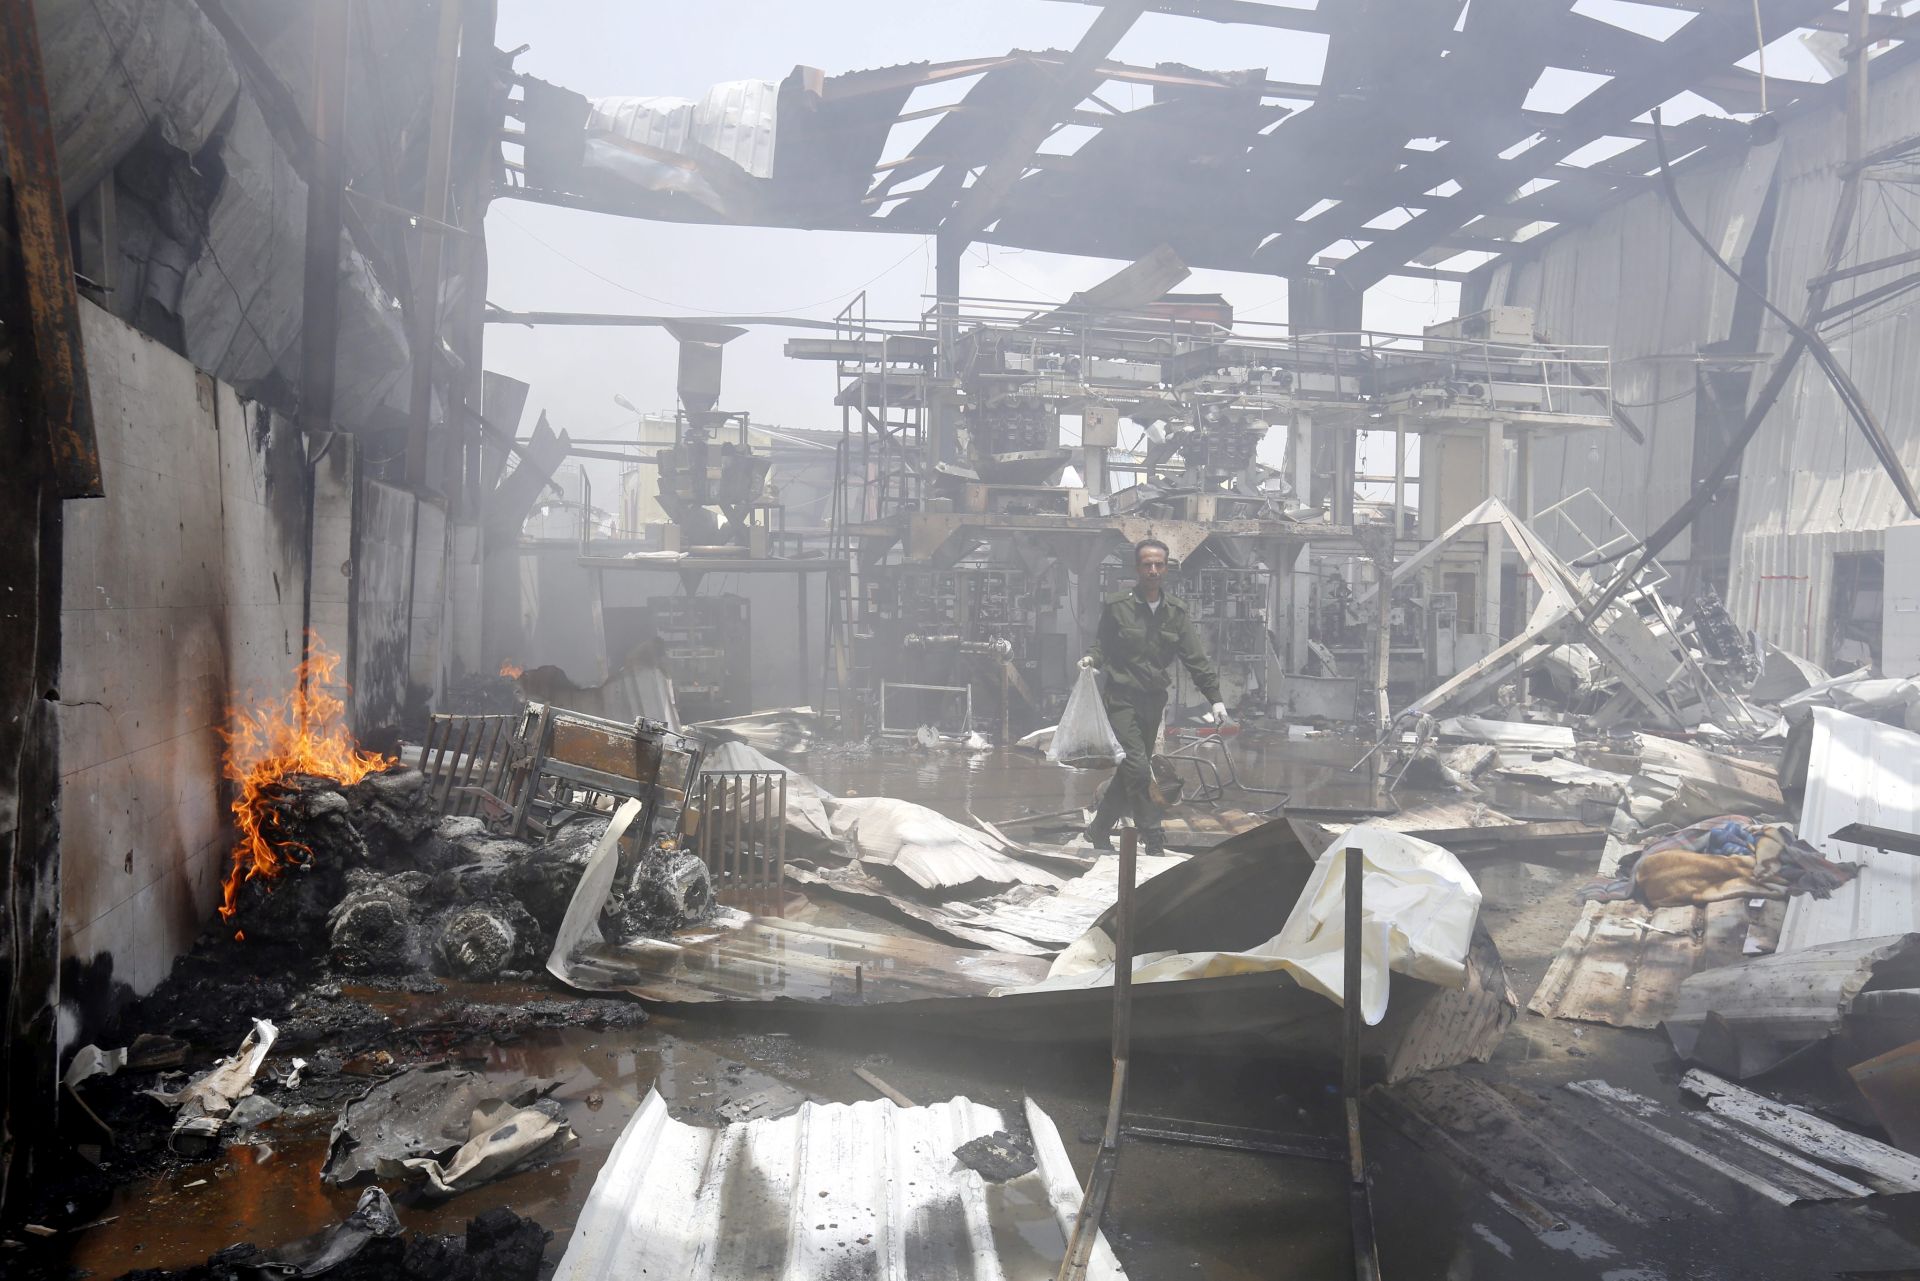 epa05467107 A Yemeni soldier inspects a food factory allegedly targeted by a Saudi-led airstrike in Sana'a, Yemen, 09 August 2016. According to reports, the Saudi-led military coalition conducted airstrikes on the capital Sana'a, including a food factory, killing at least 14 workers and wounding dozens others, few days after UN-sponsored peace talks in Kuwait between Yemen's warring factions were halted.  EPA/YAHYA ARHAB